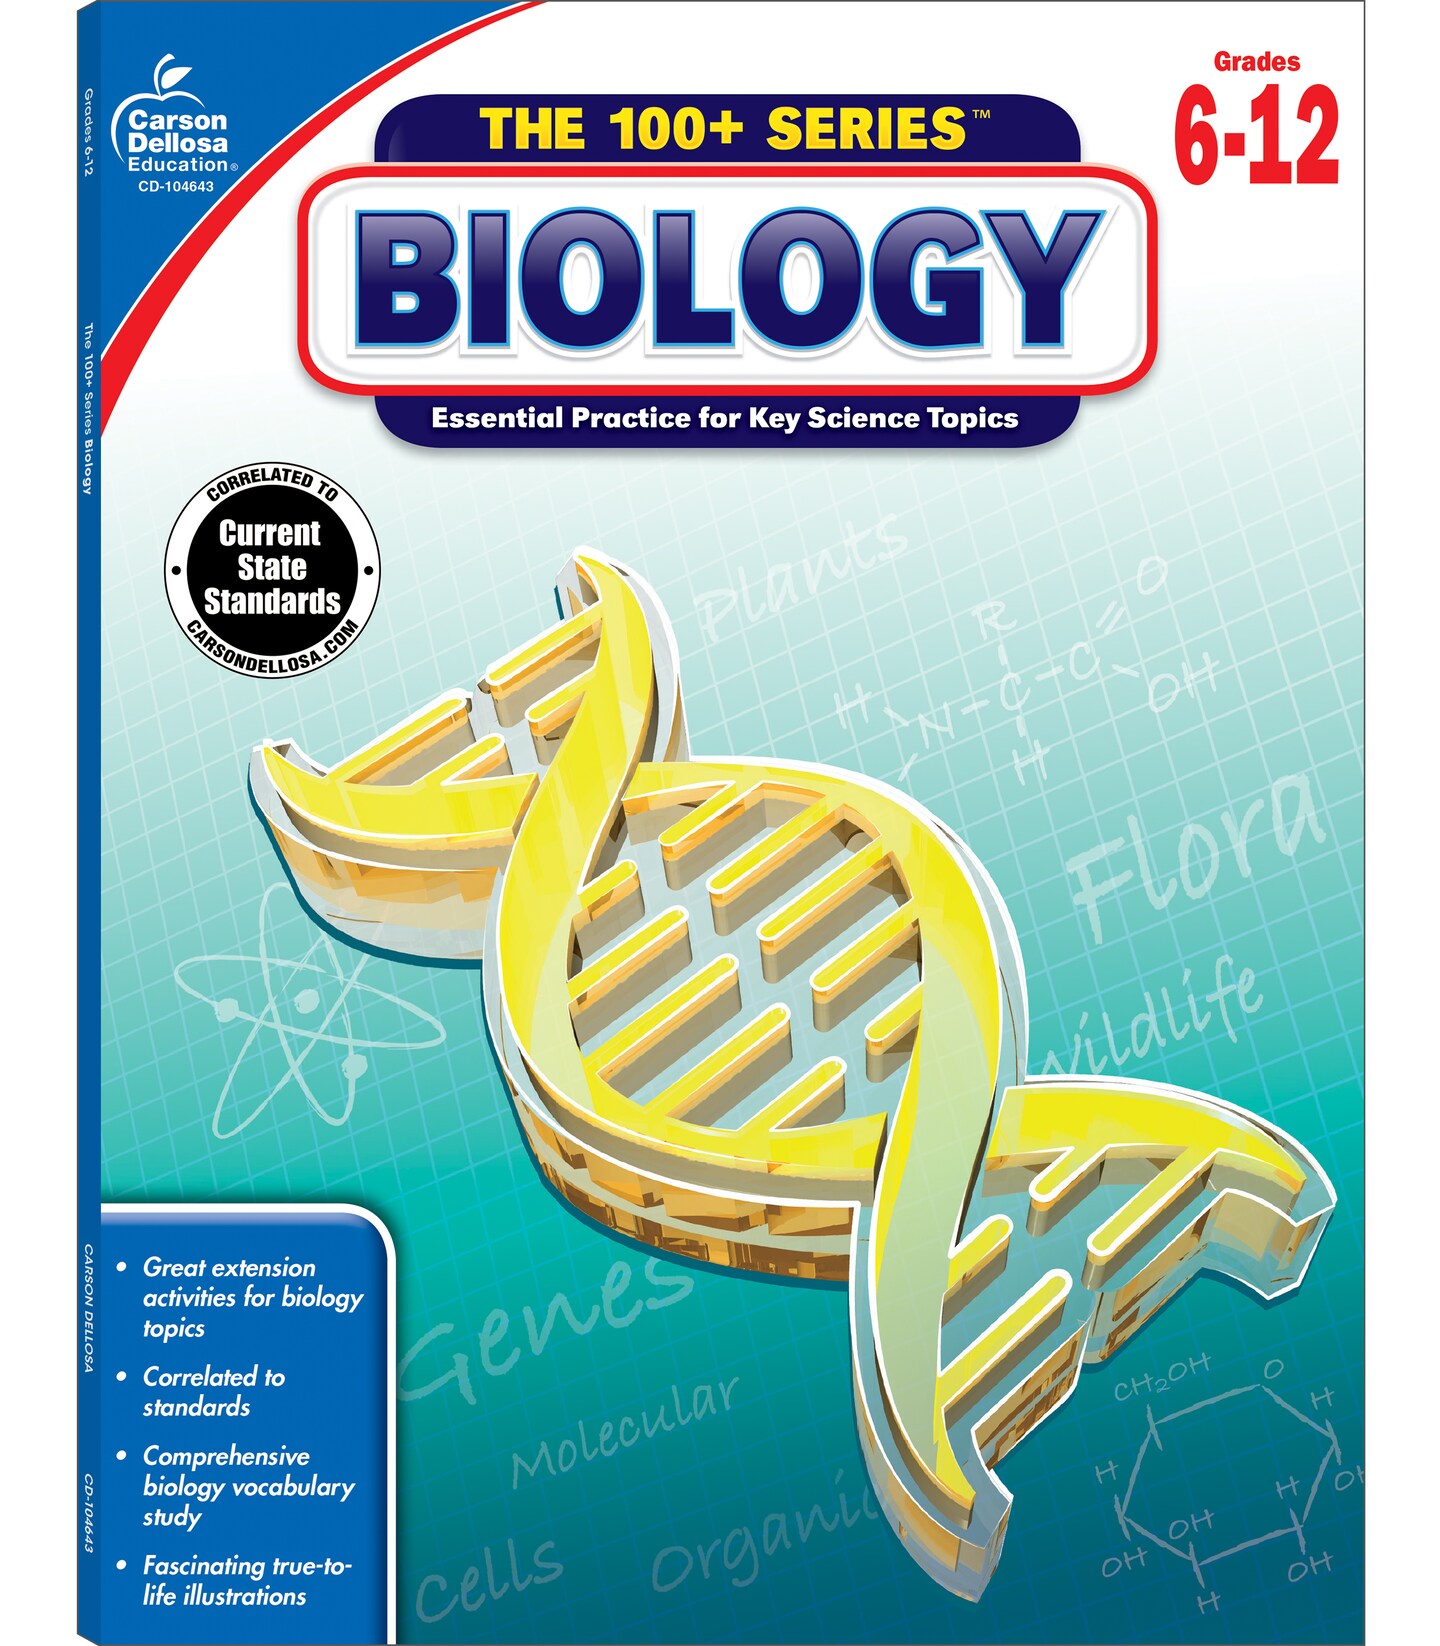 The 100+ Series: Biology Workbook, Grades 6-12 Science Book Covering the Scientific Method, Elements, States of Matter, Anatomy, Balancing Scientific Equations, Classroom or Homeschool Curriculum